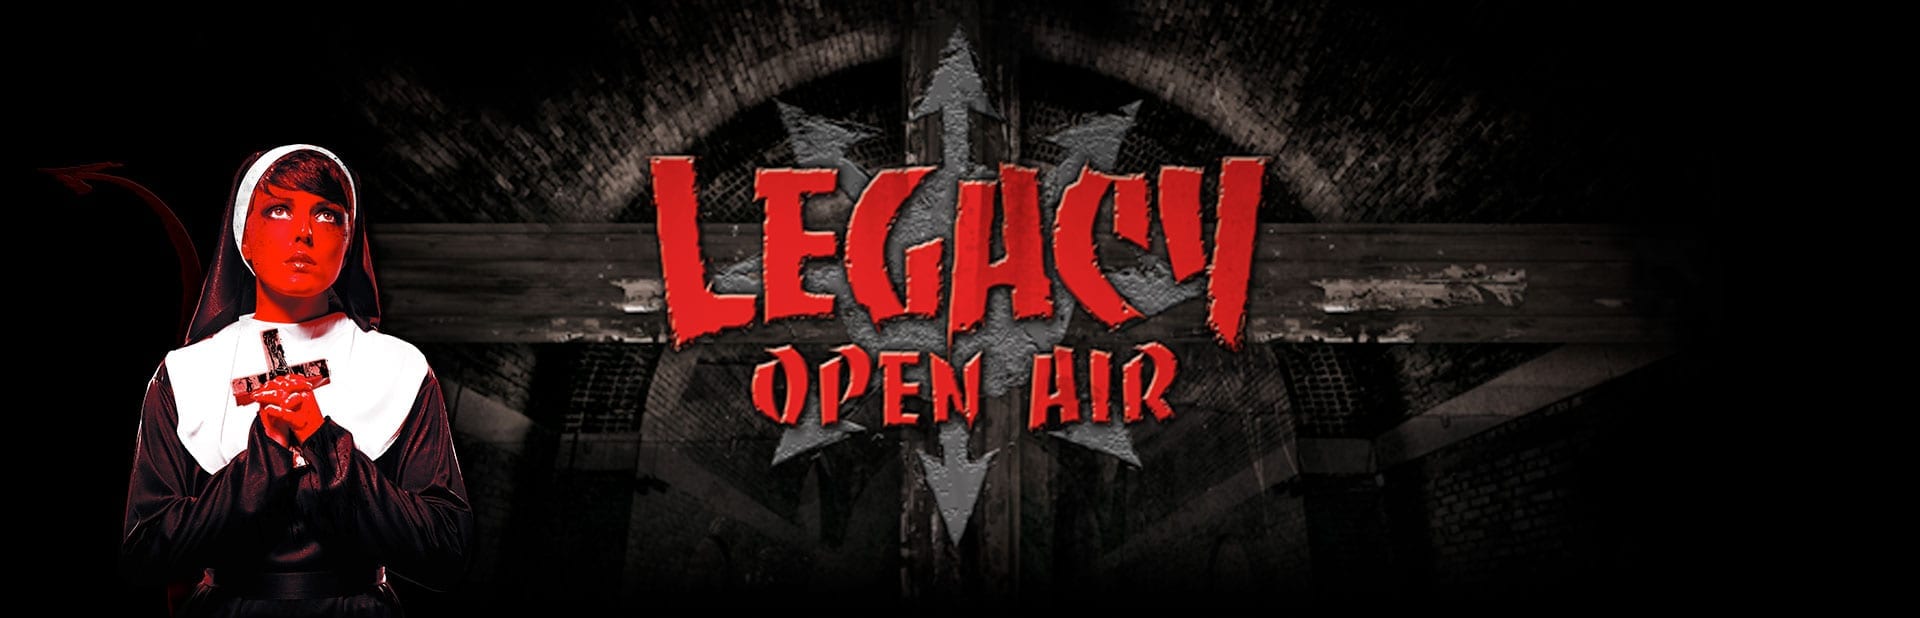 Legacy Open Air 2014